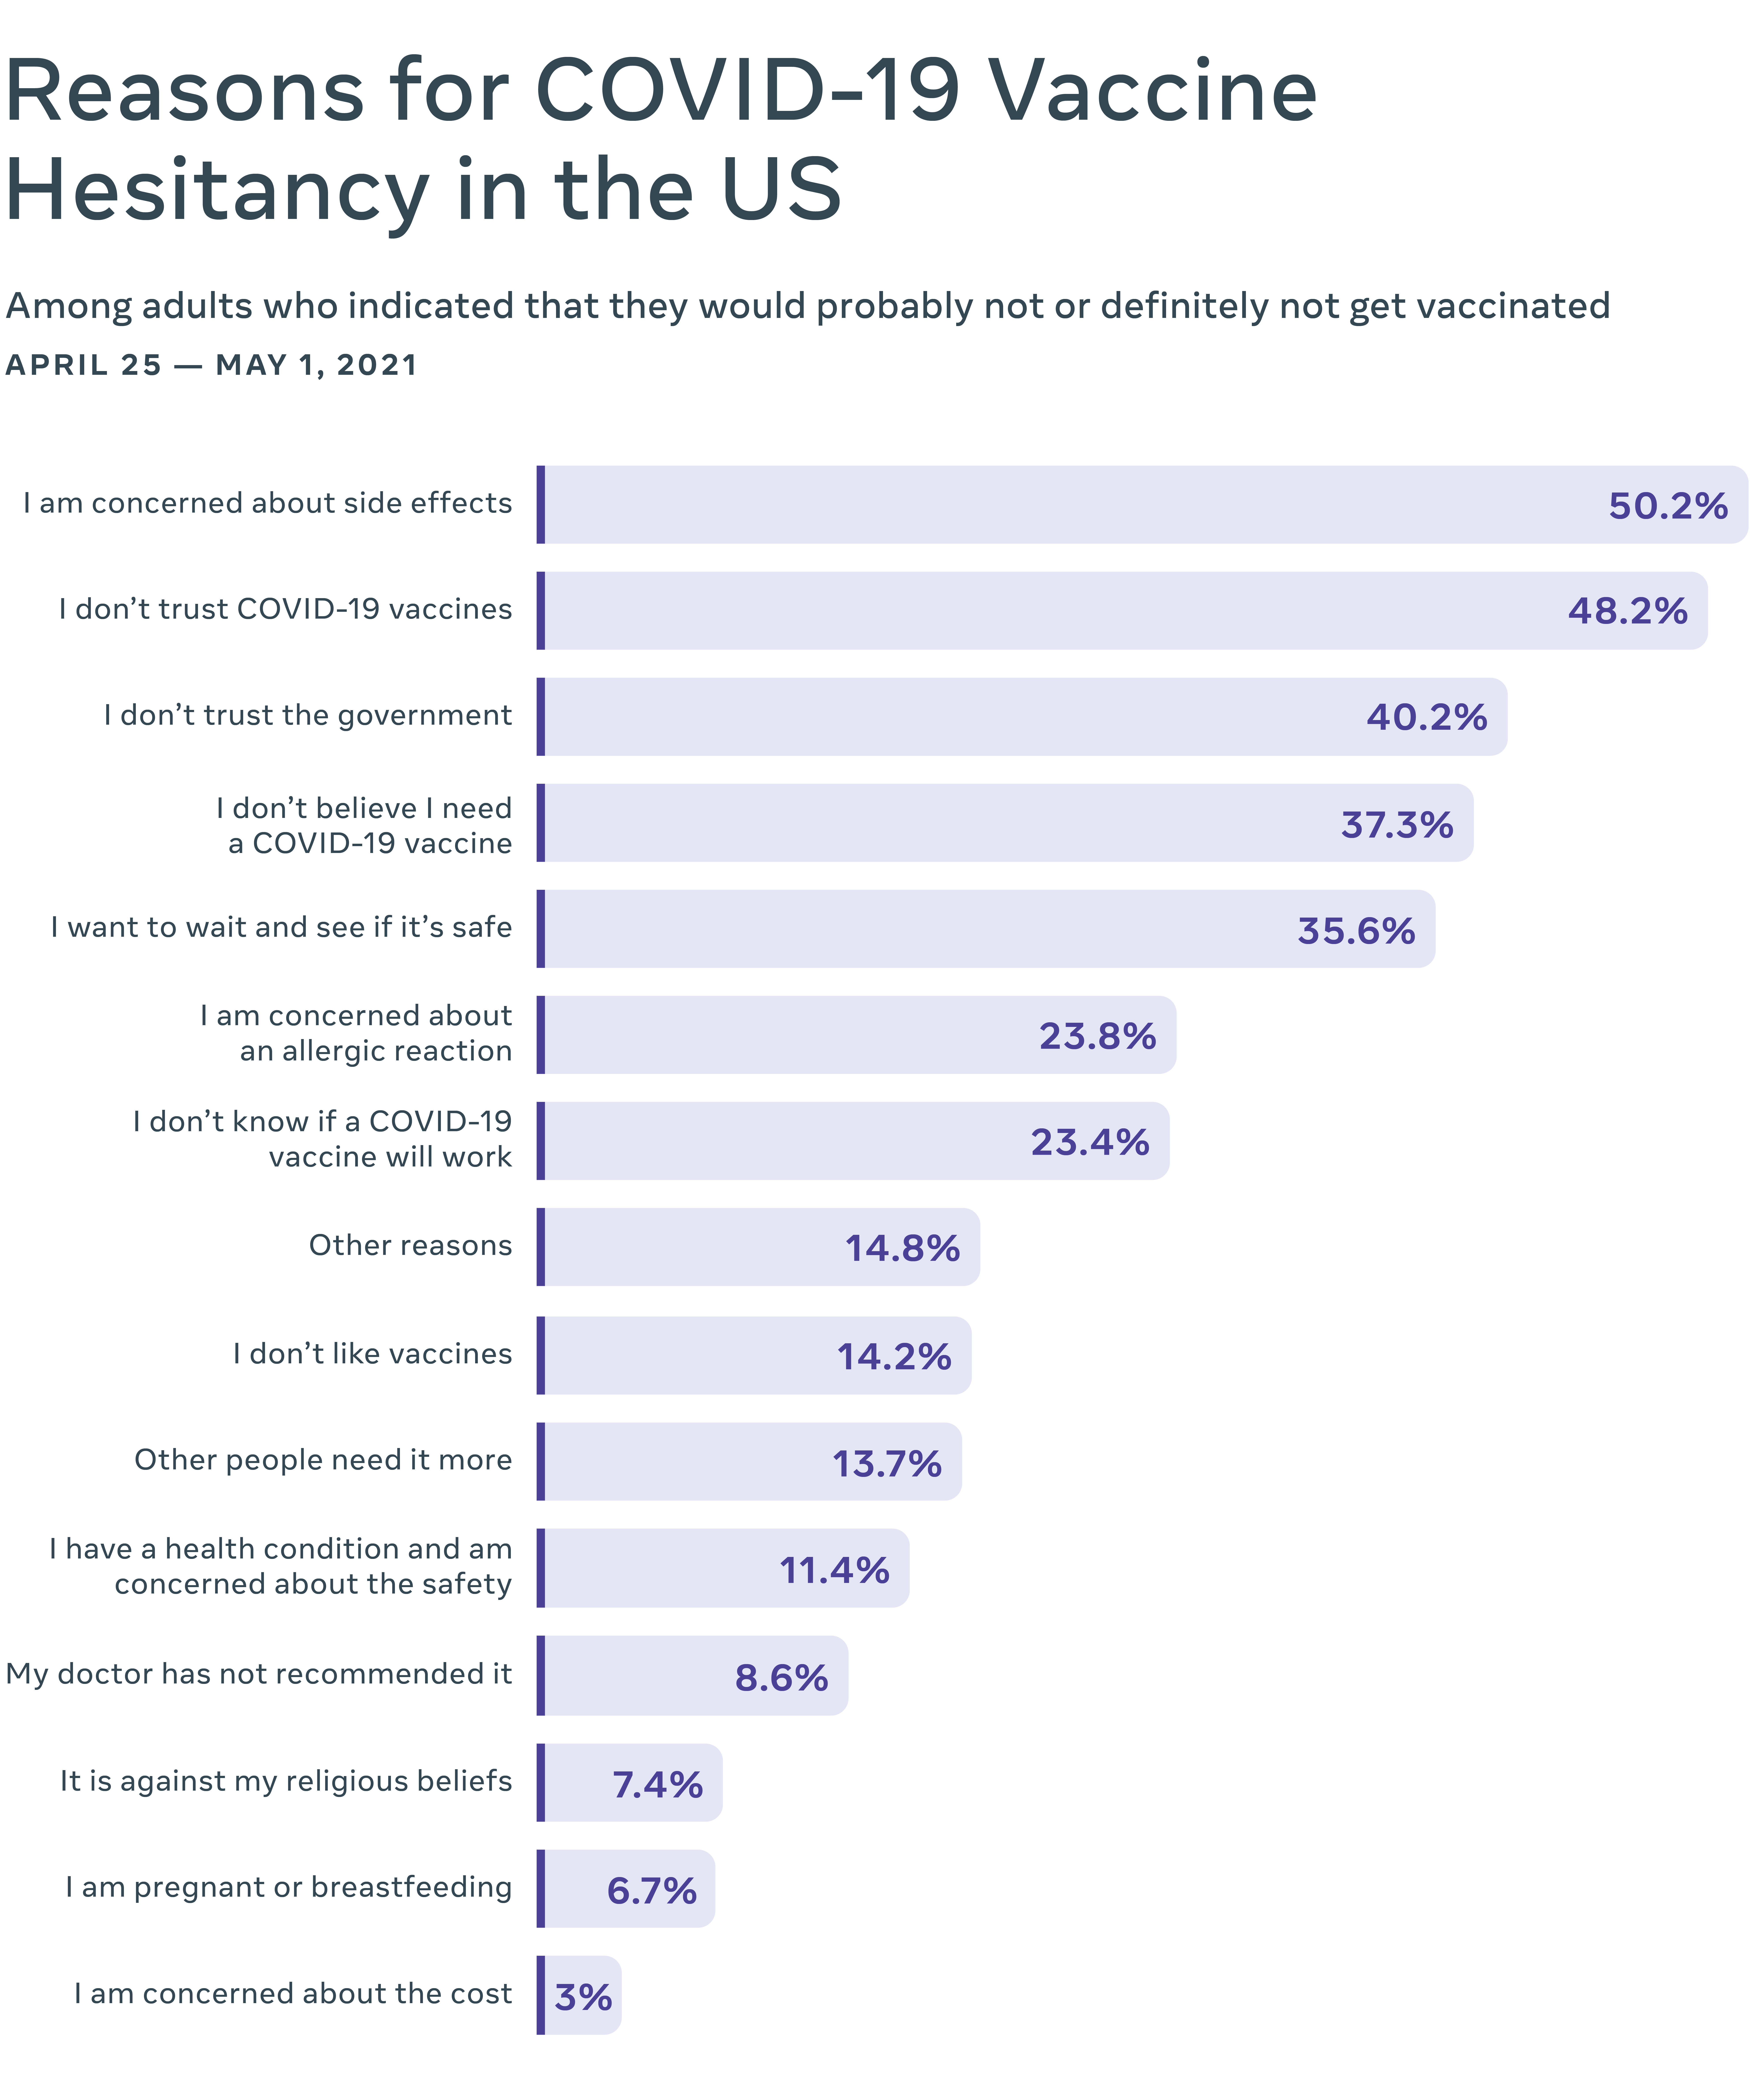 Chart of reasons for vaccine hesitancy in the US